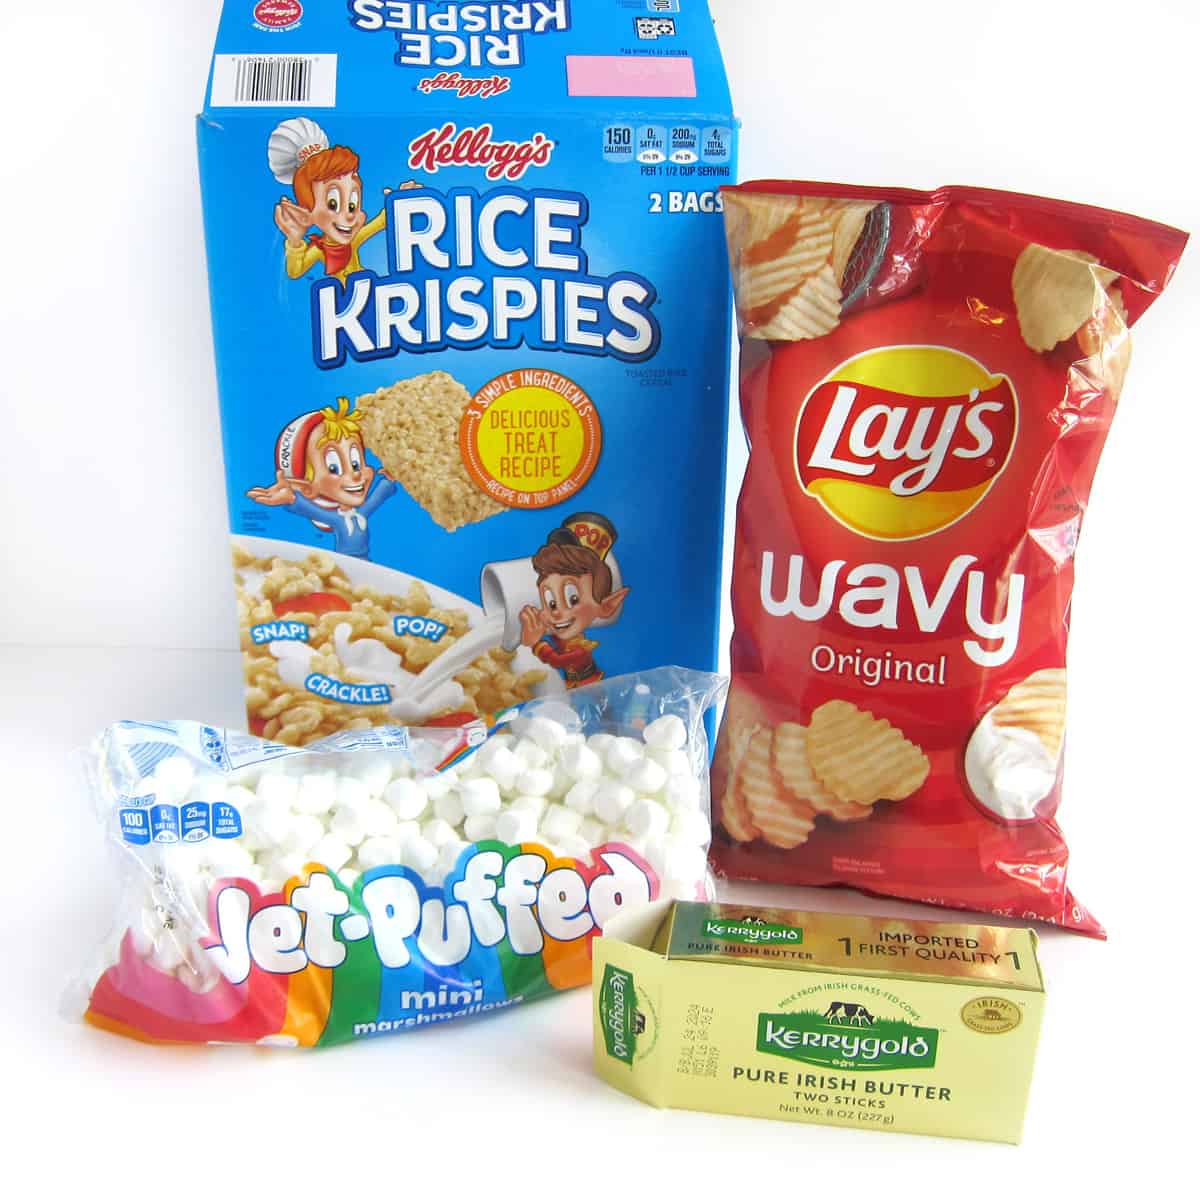 potato chip Rice Krispie treats recipe ingredients including Kellogg's Rice Krispies cereal, Lay's Wavy potato chips, Jet-Puffed mini marshmallows, and Kerrygold Pure Irish salted butter.